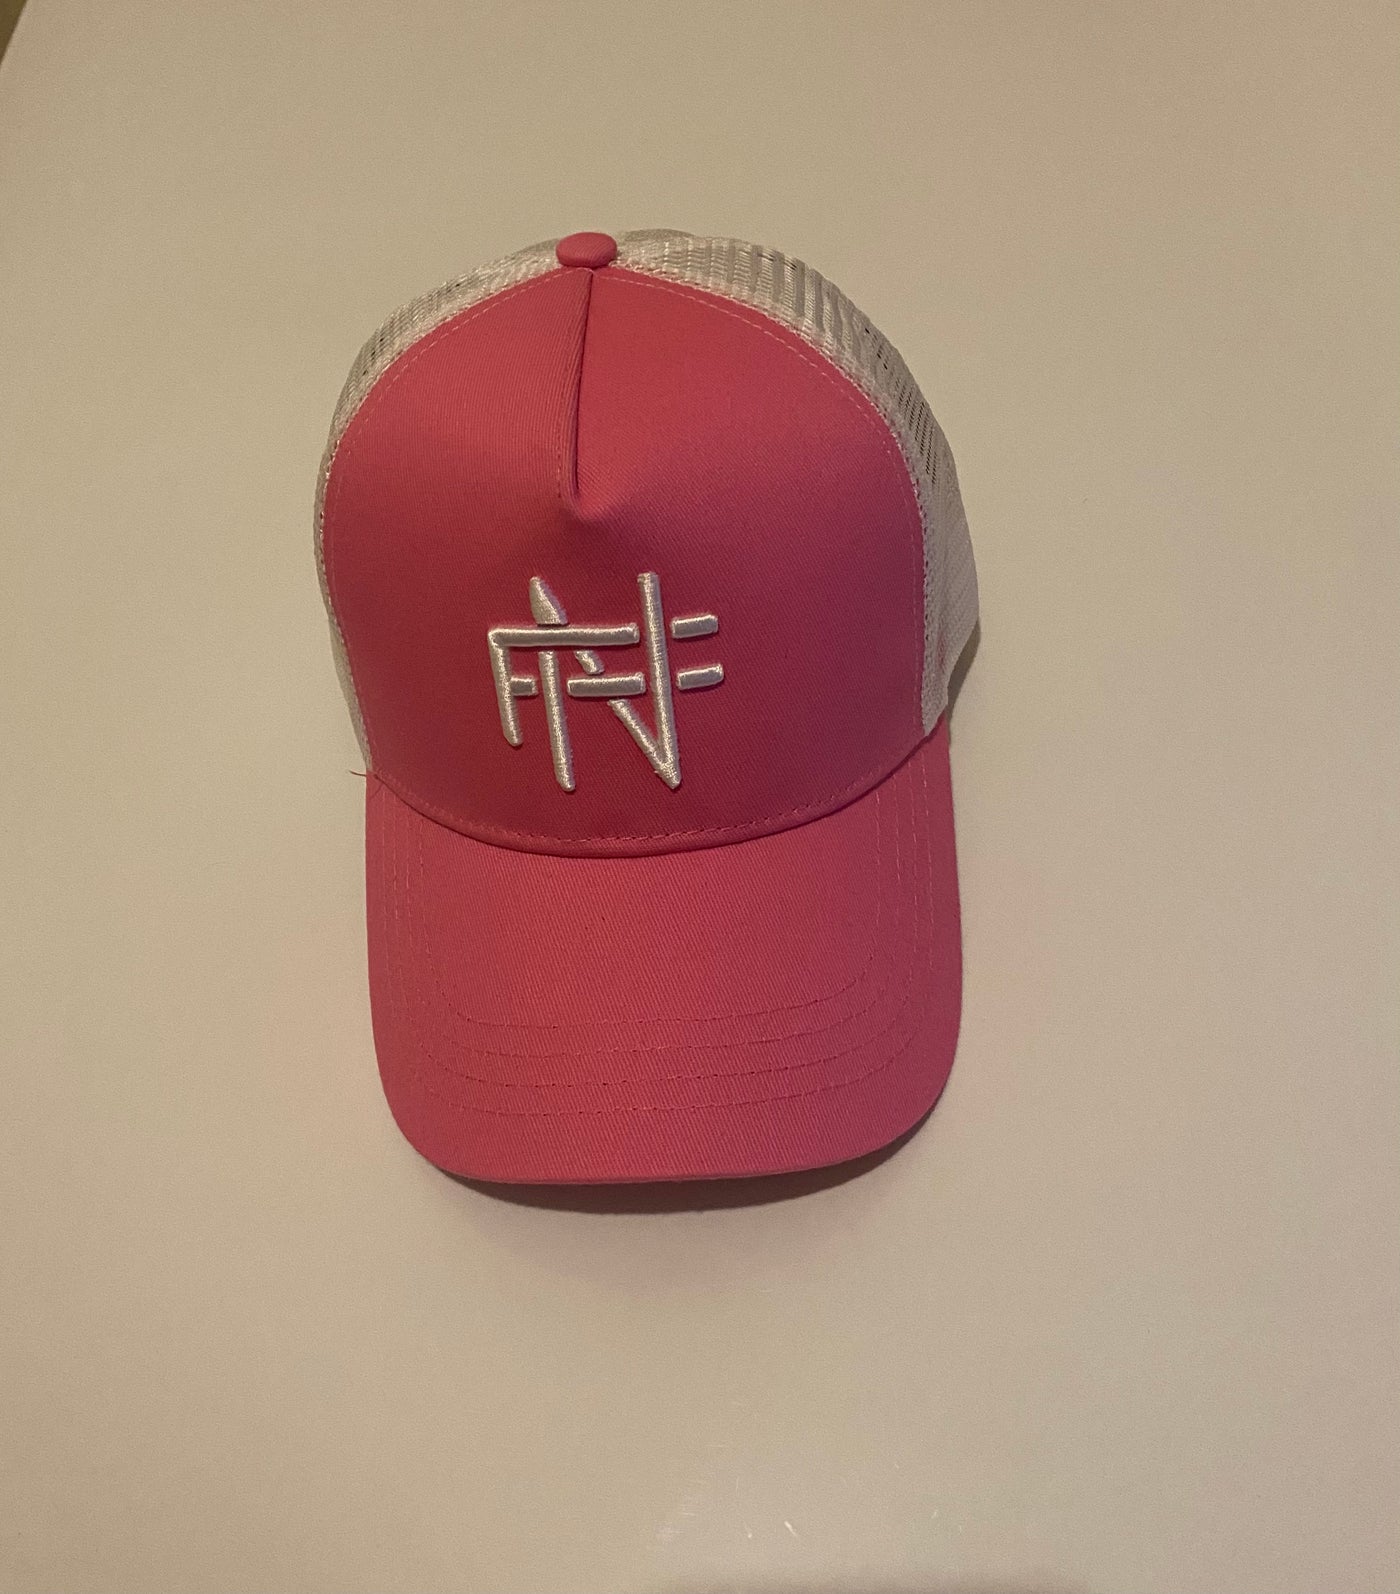 FN CAP PINK & WHITE | FN Cap Pink & White | Fashionable Baseball Cap for a Playful Look